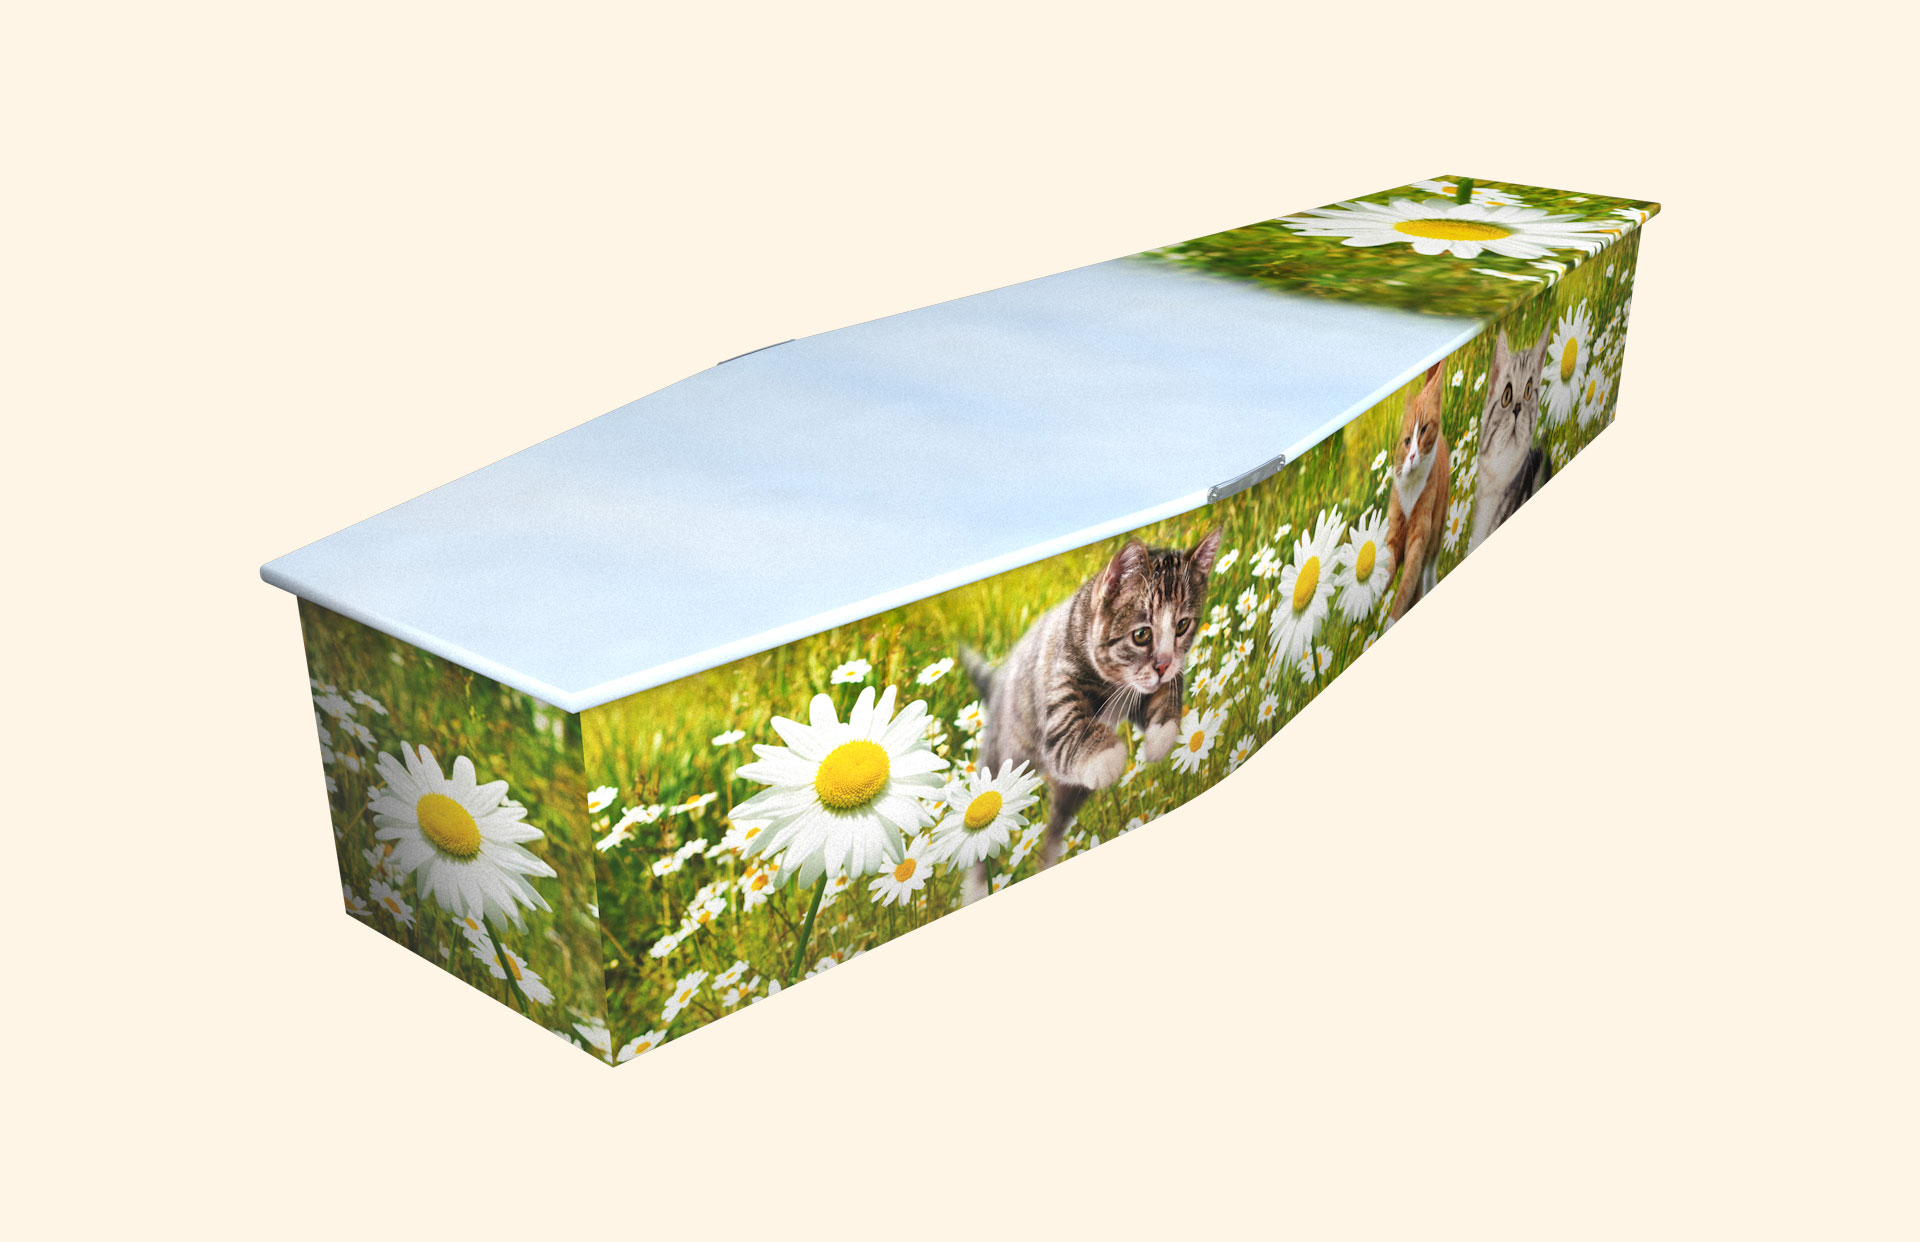 Purrfect Daisy design on a traditional coffin